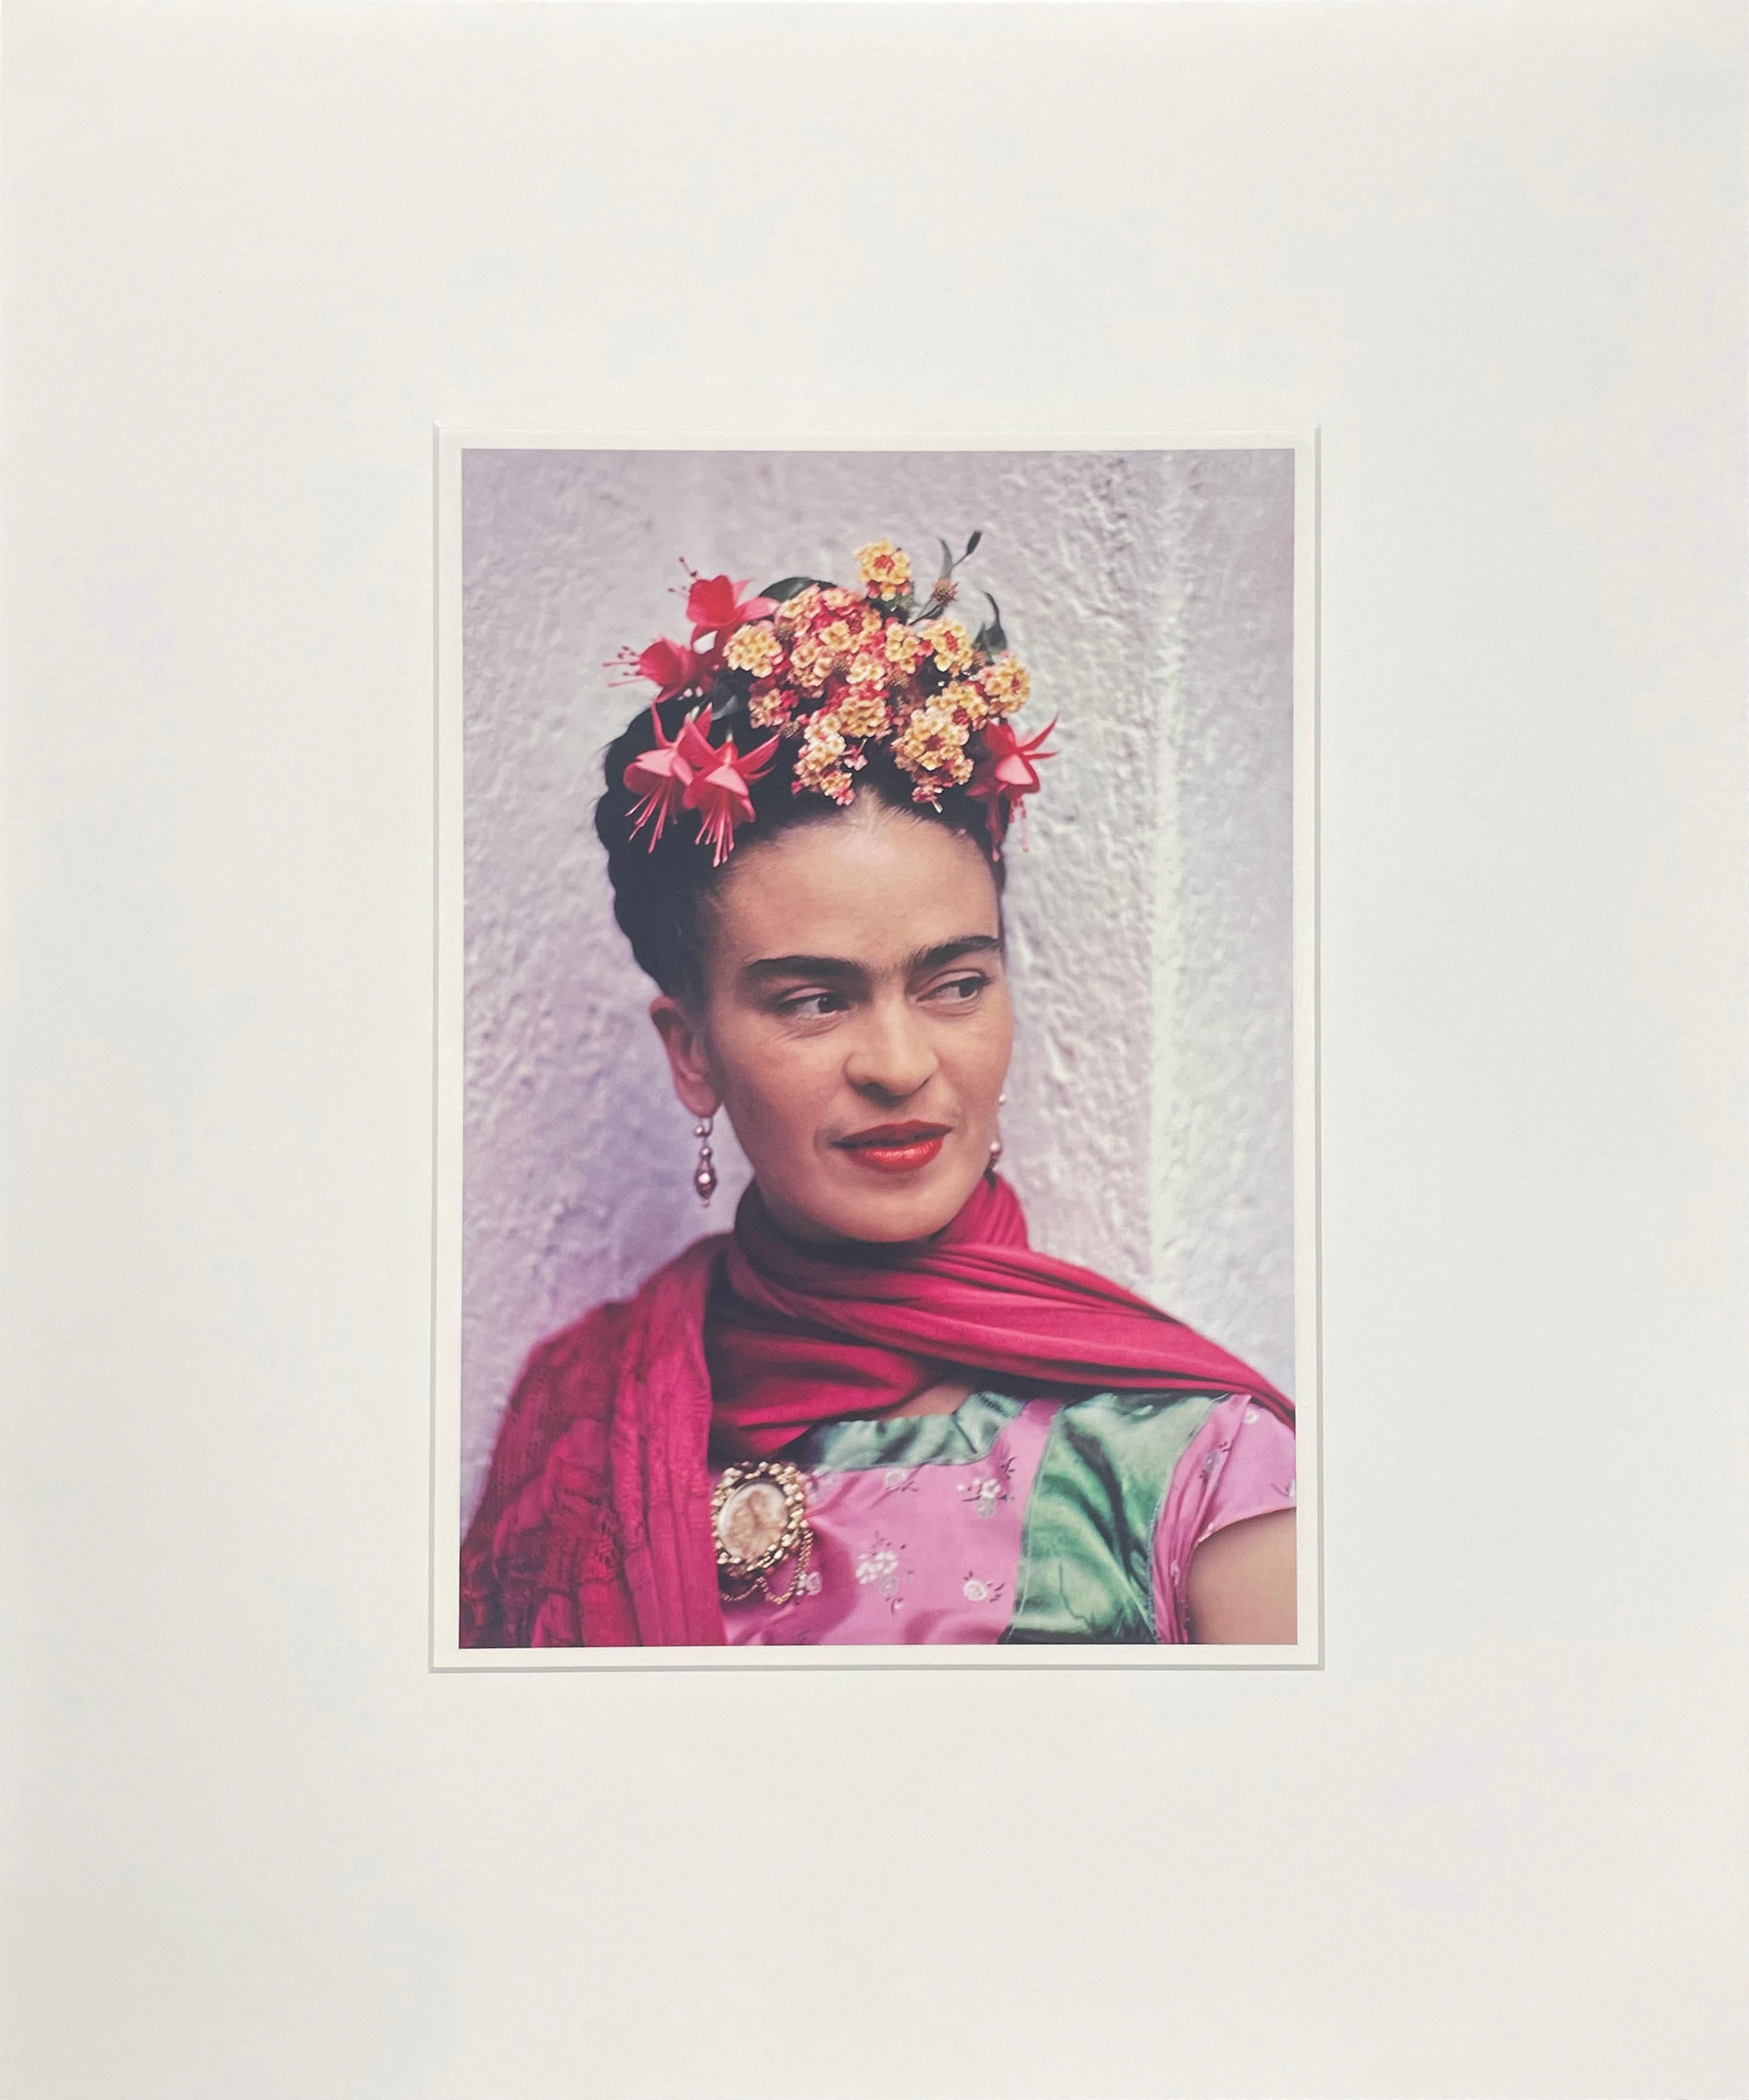 Frida in Pink and Green Blouse - Photograph by Nickolas Muray